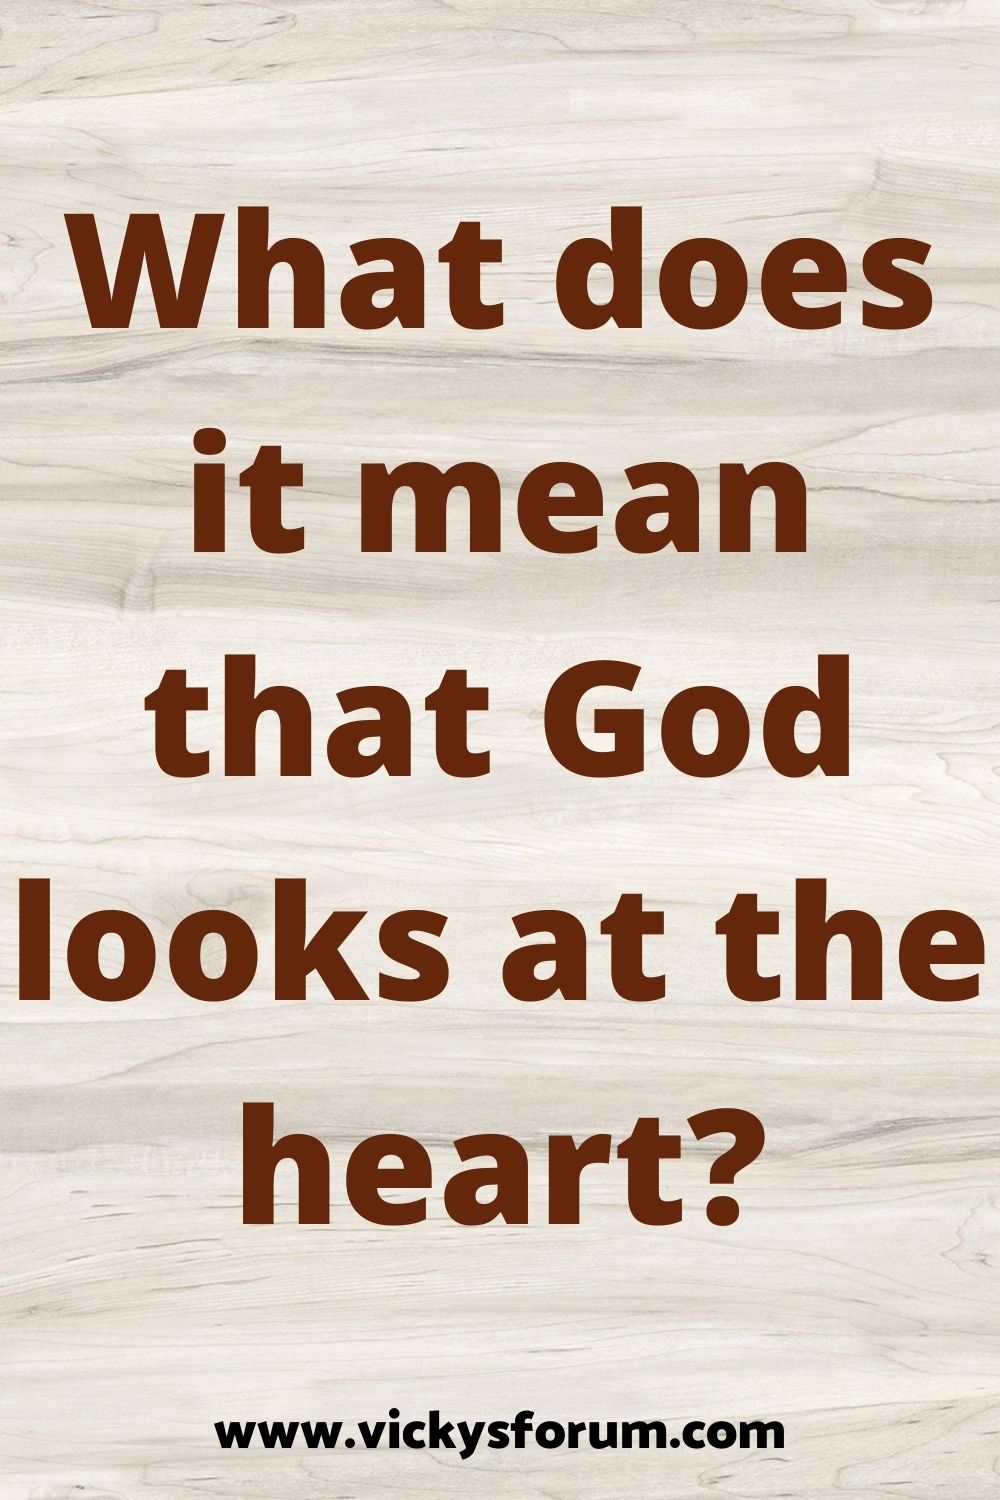 God looks at the heart